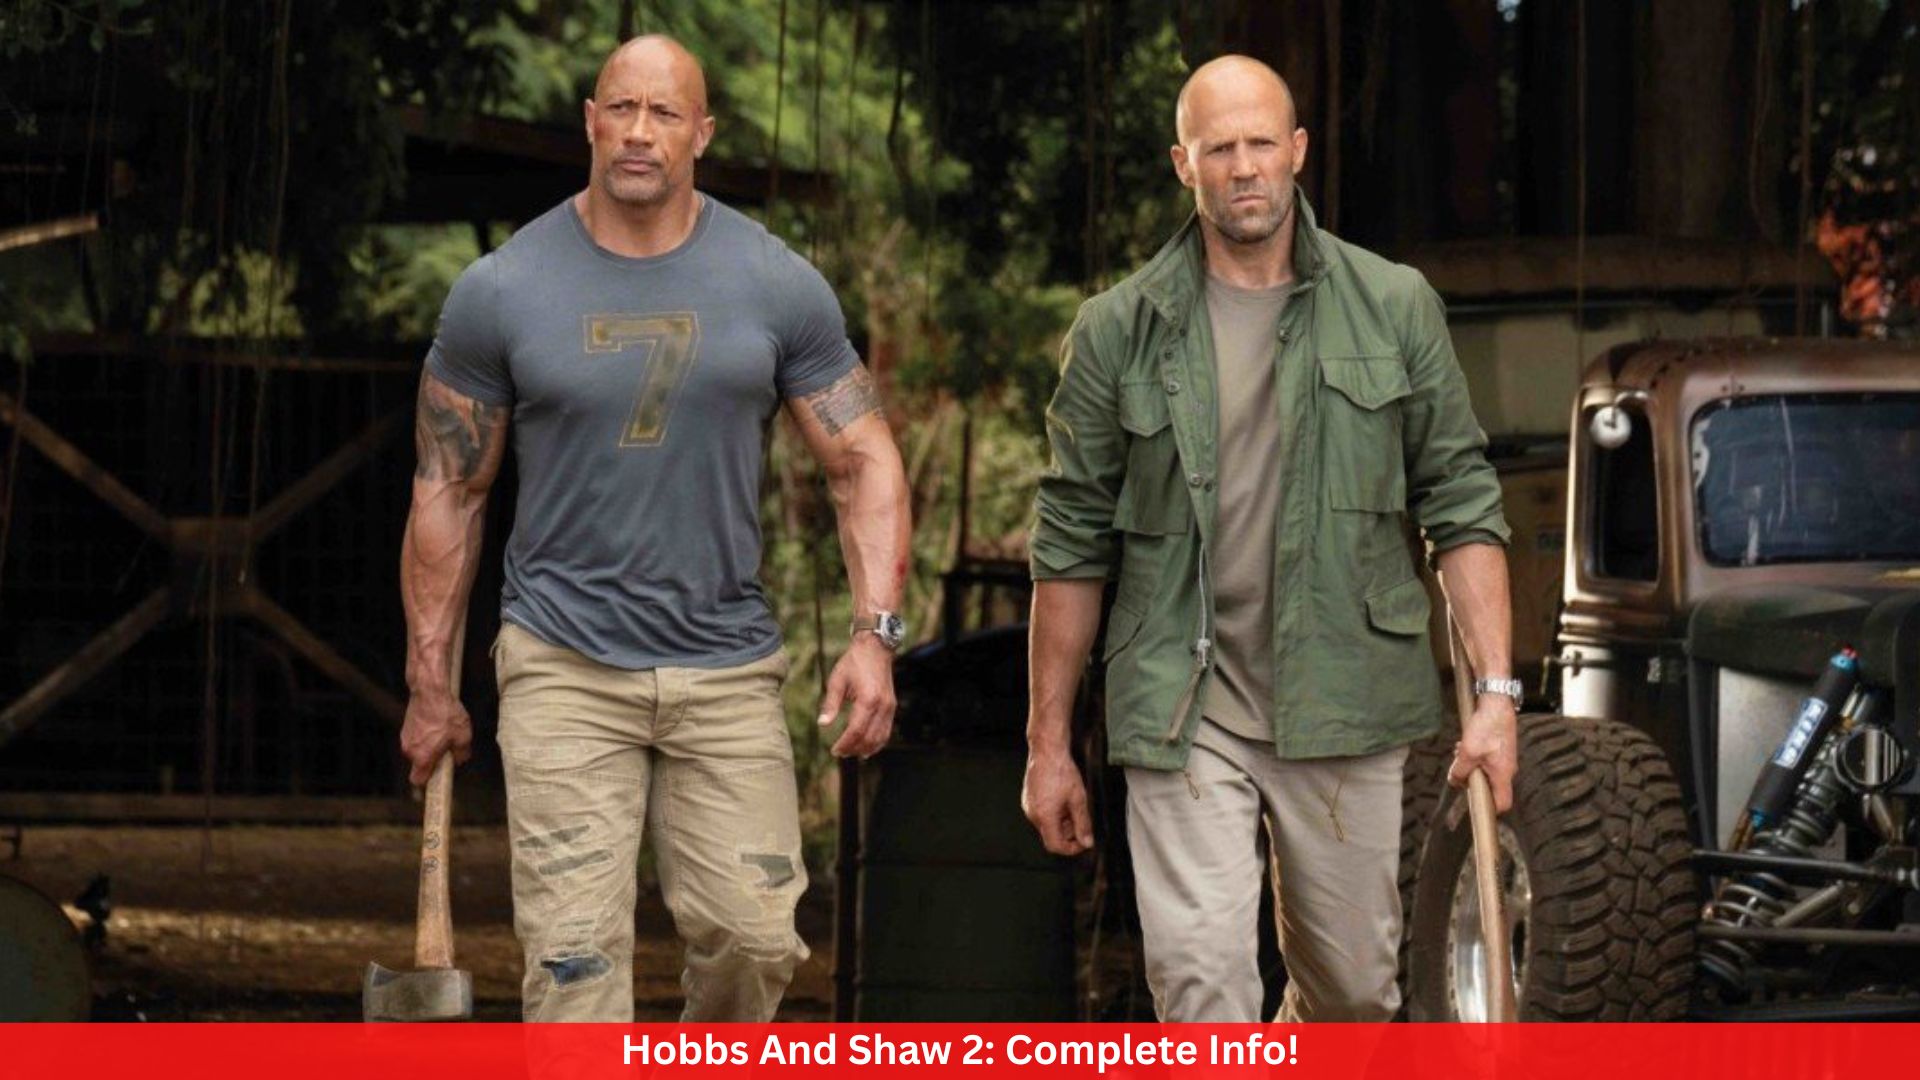 Hobbs And Shaw 2: Complete Info!